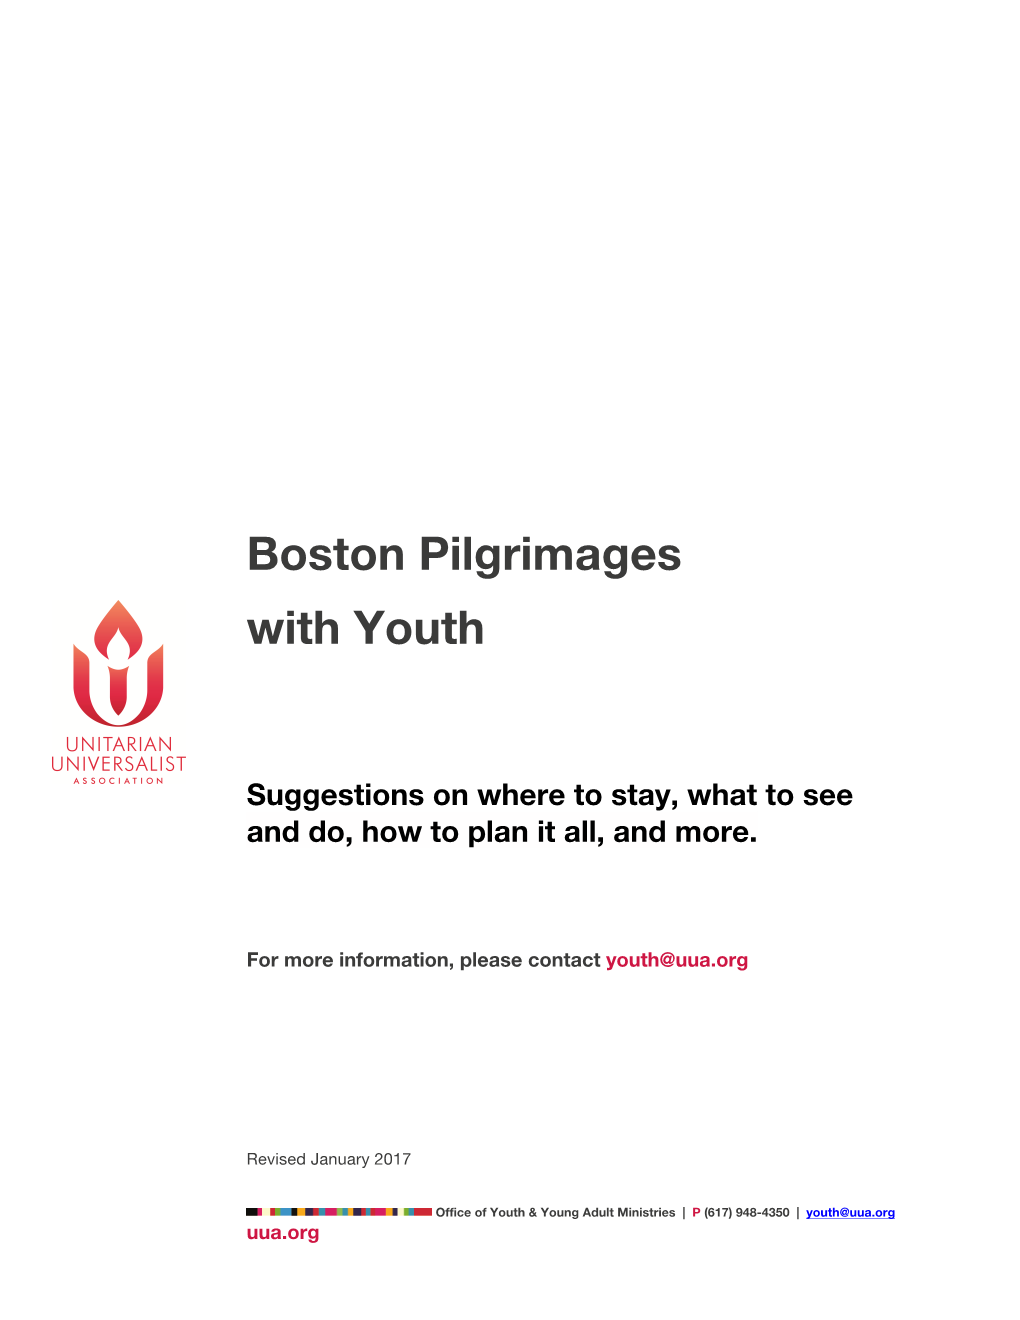 Boston Pilgrimages with Youth